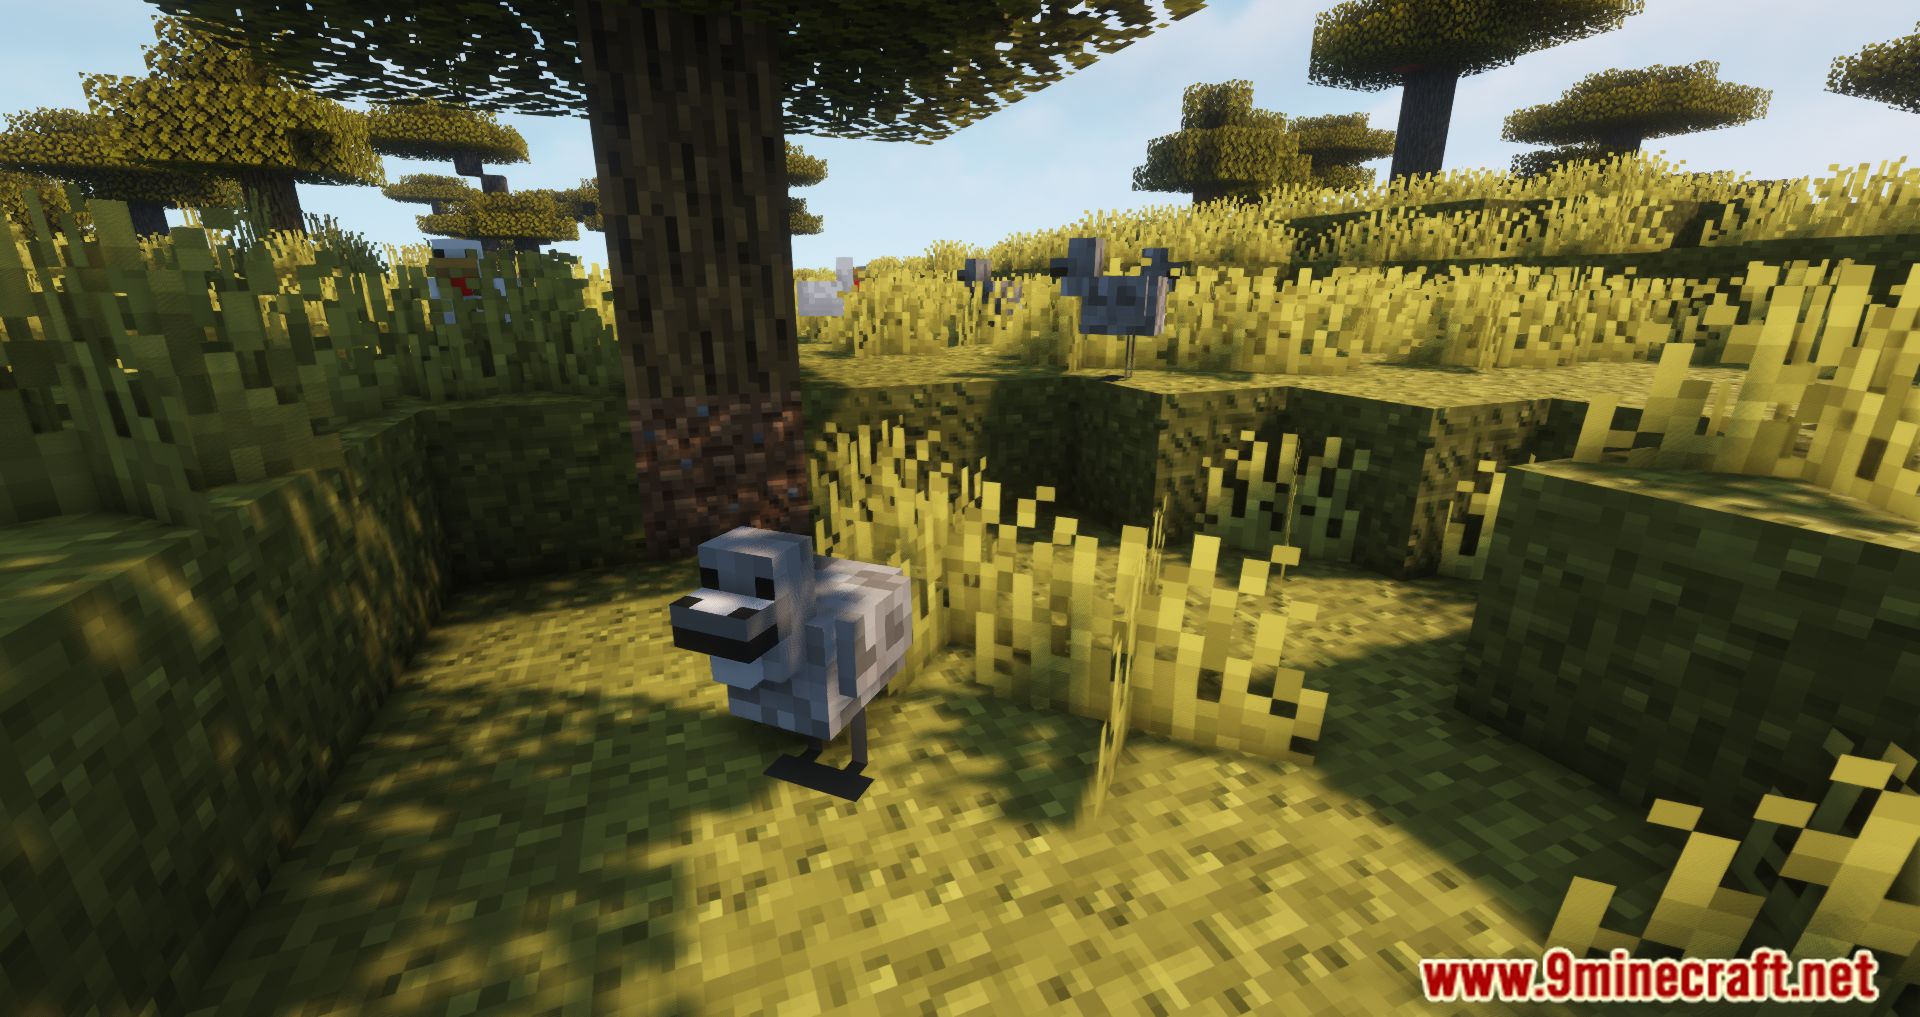 CreeperHost Presents Chickens Mod (1.19.2, 1.18.2) - Chickens Are Less Noisy 8